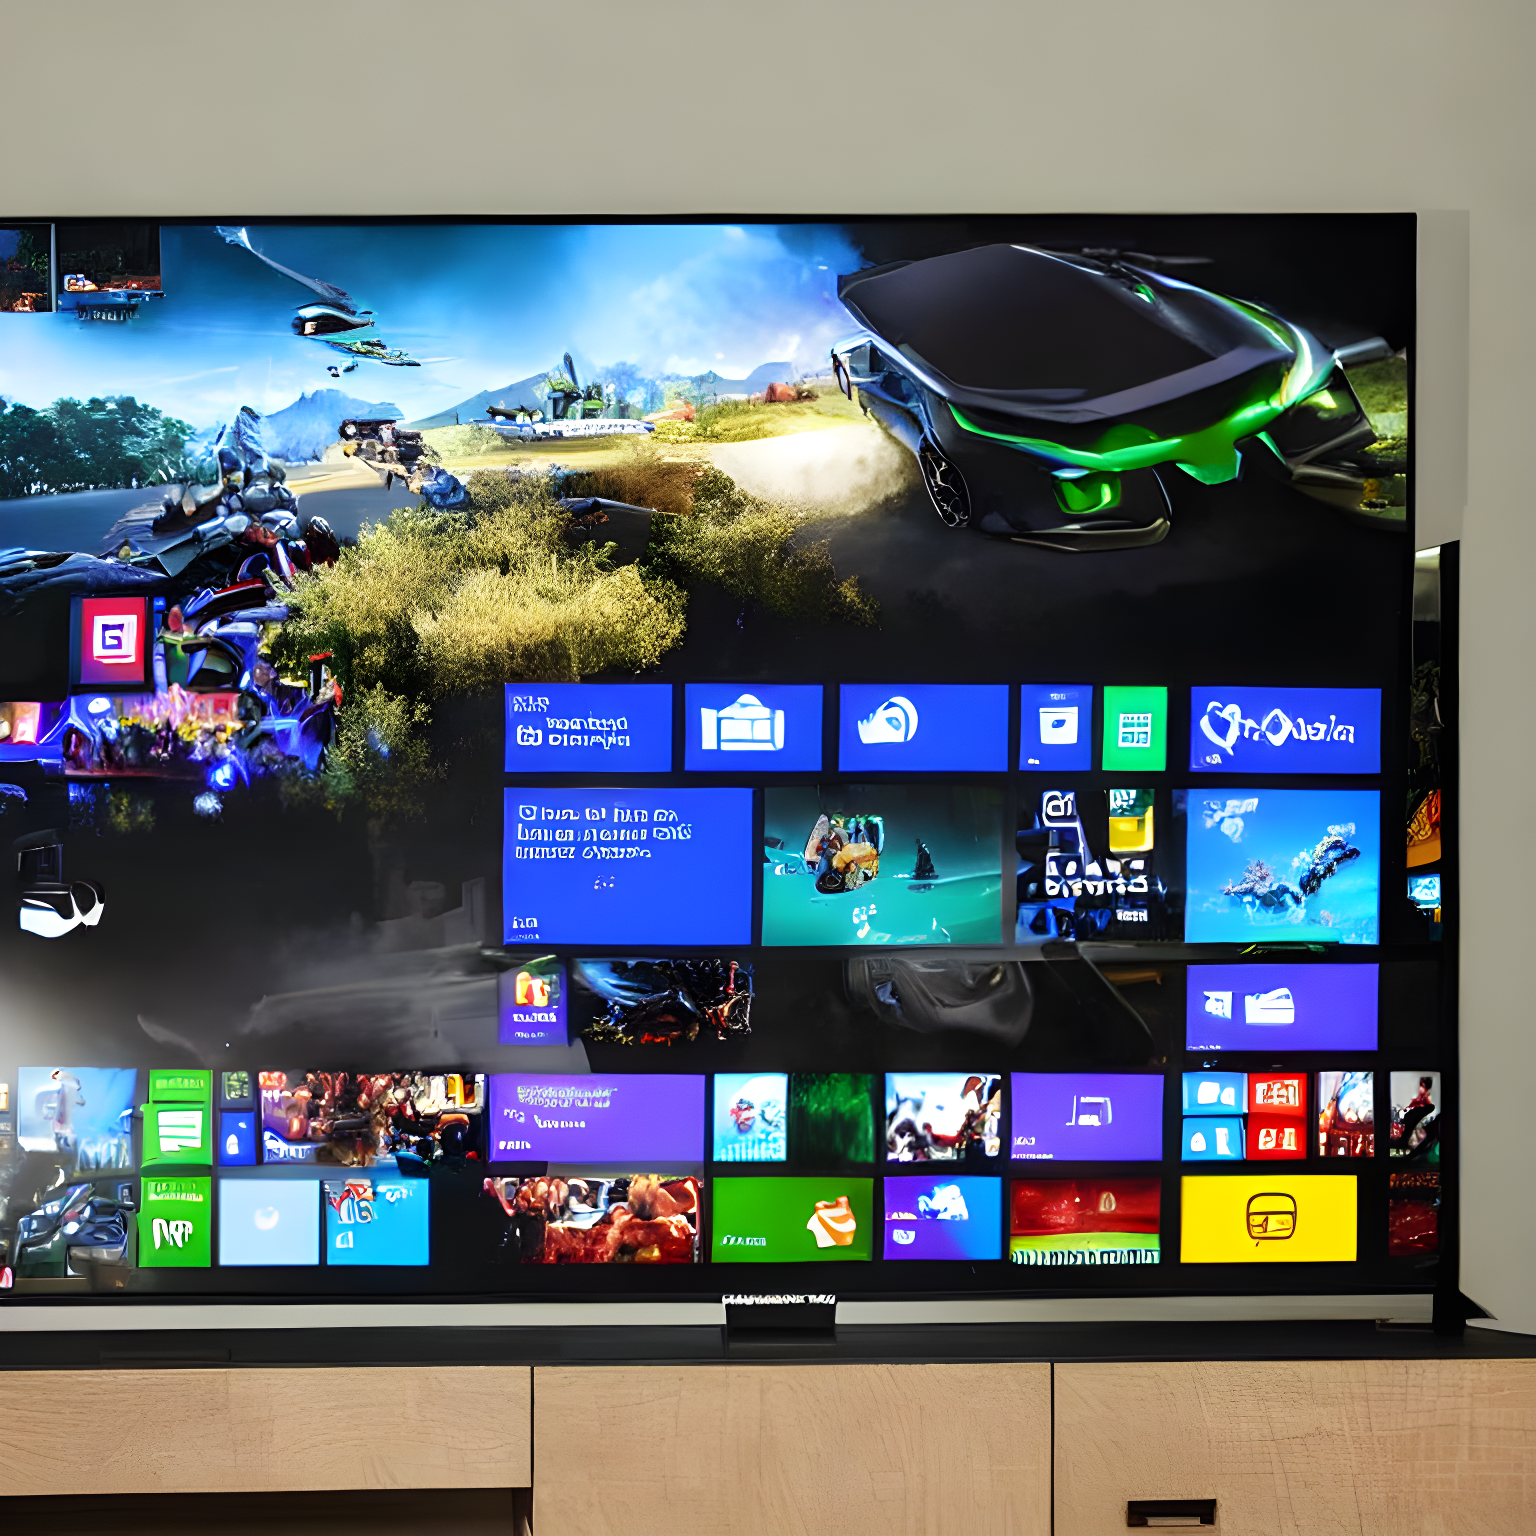 Microsoft's XBox playing on a large screen tv